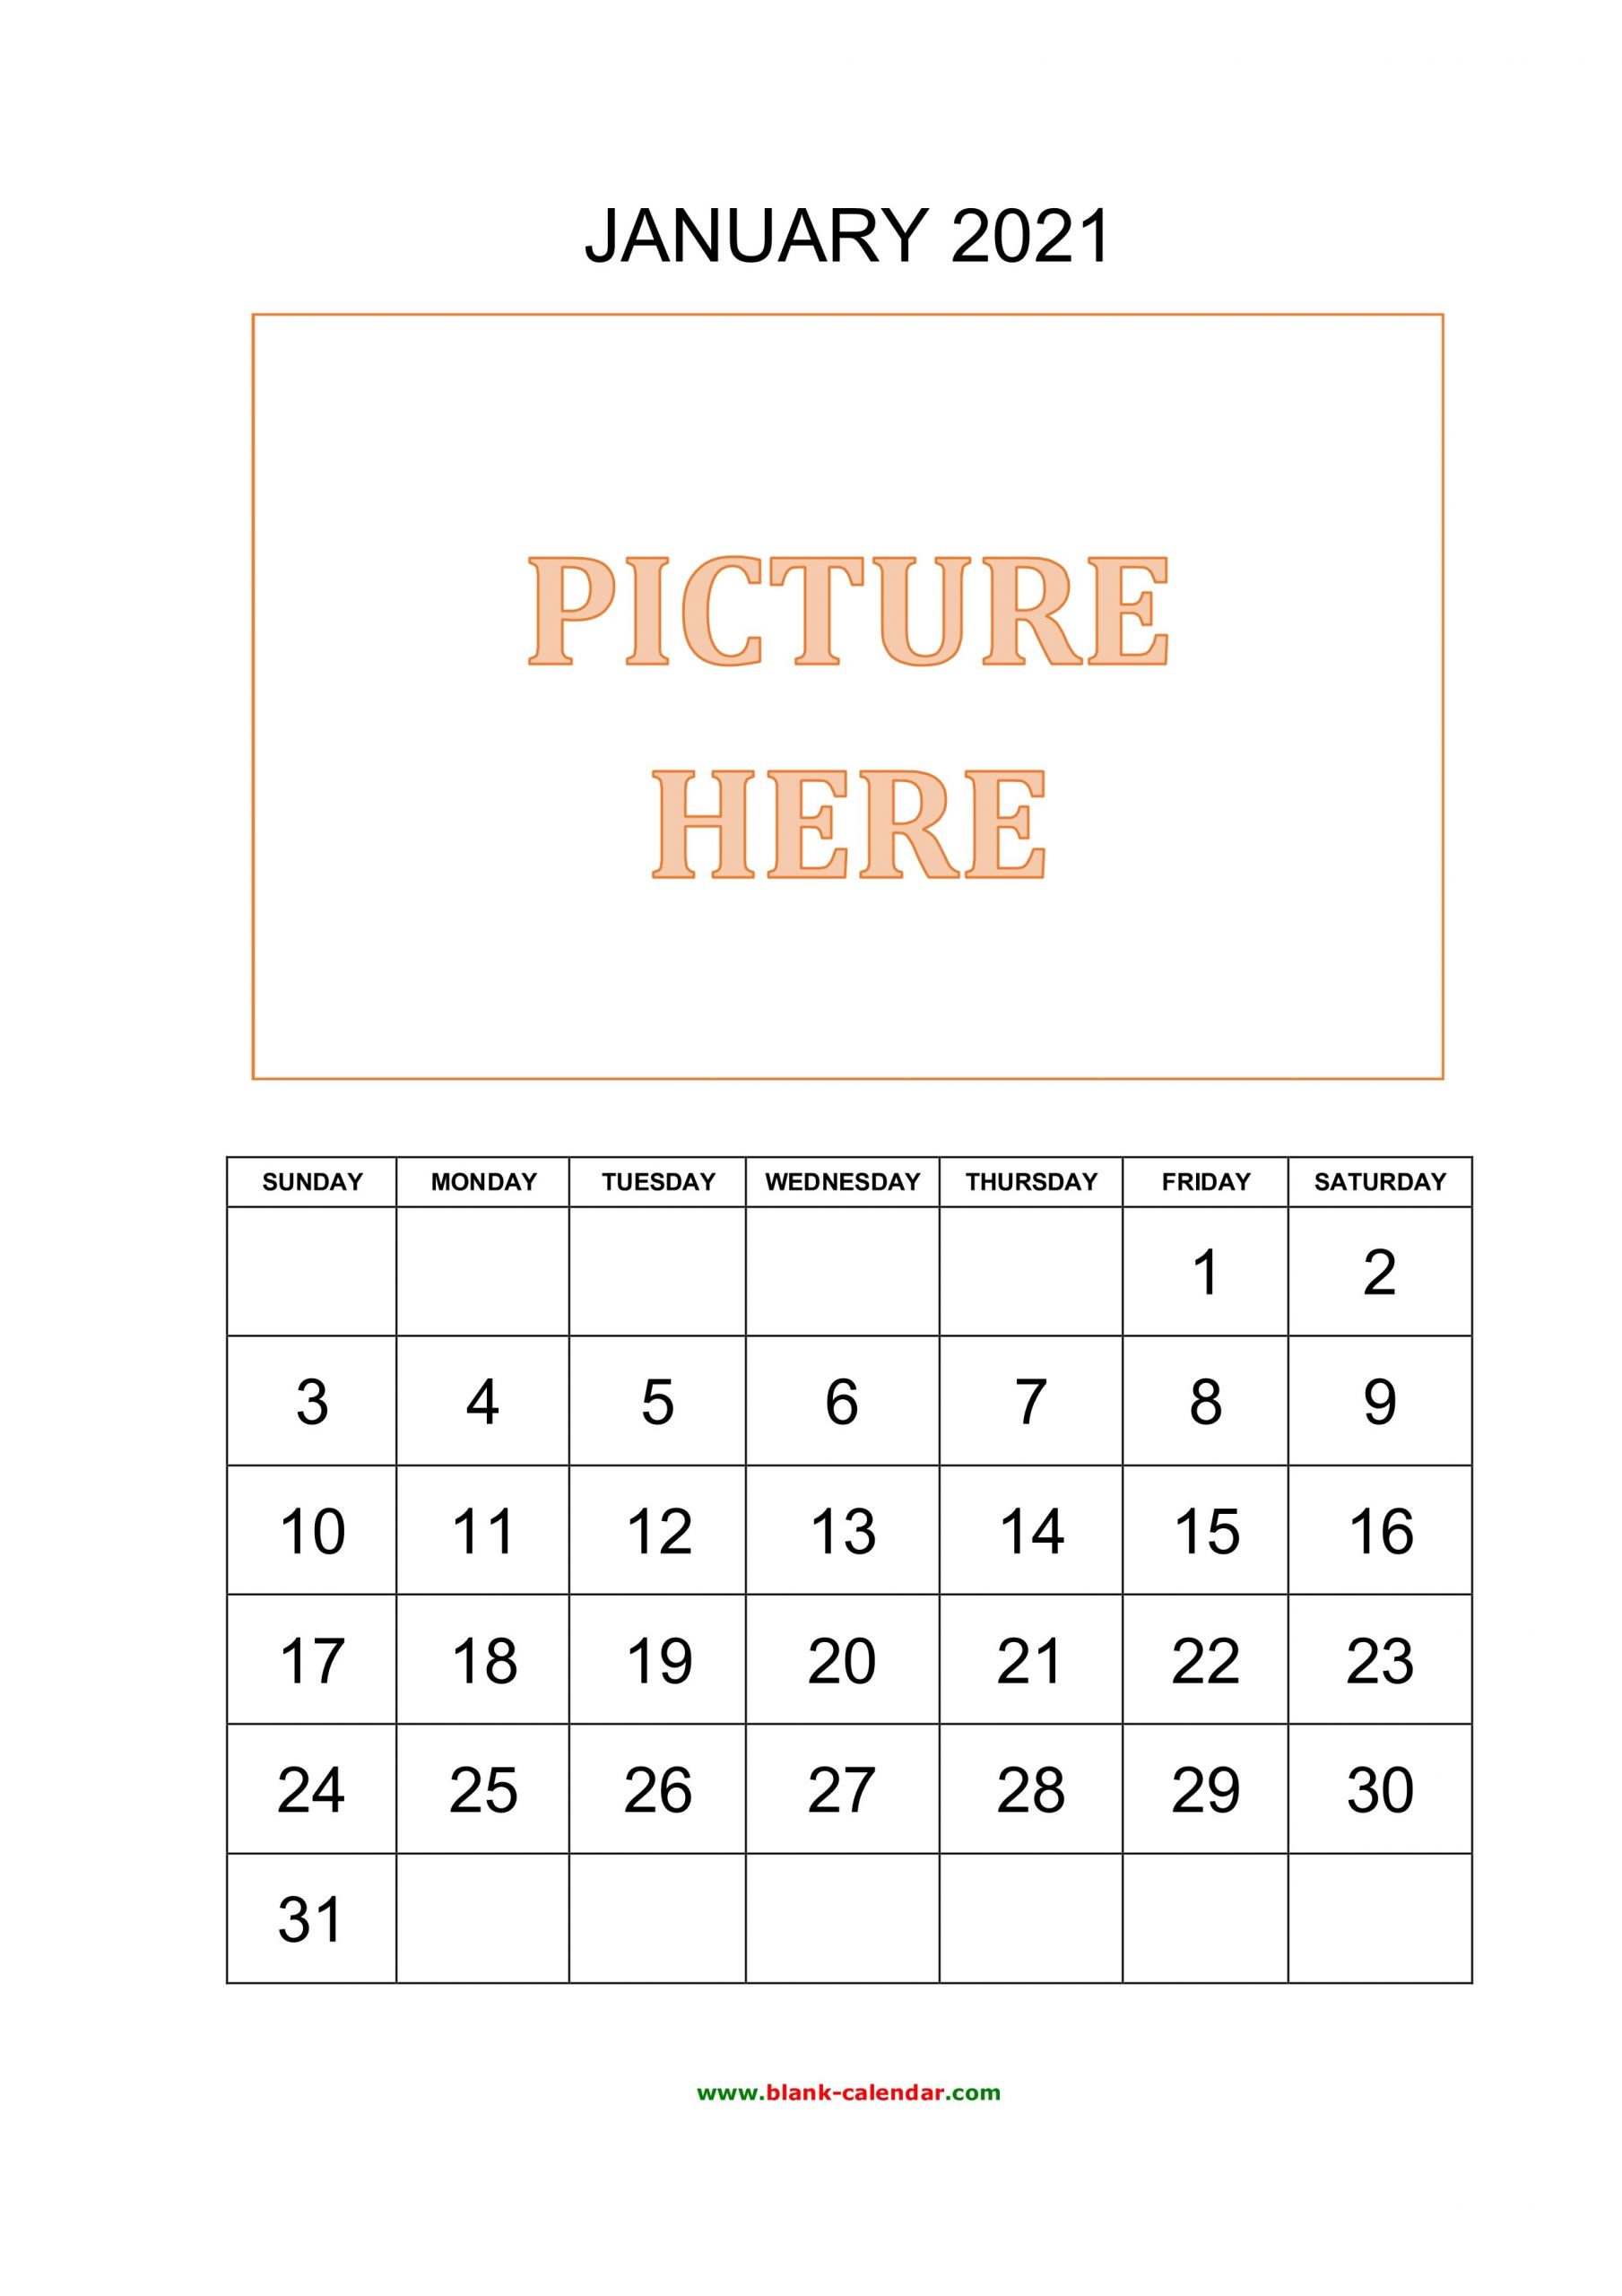 Free Download Printable January 2021 Calendar pictures can